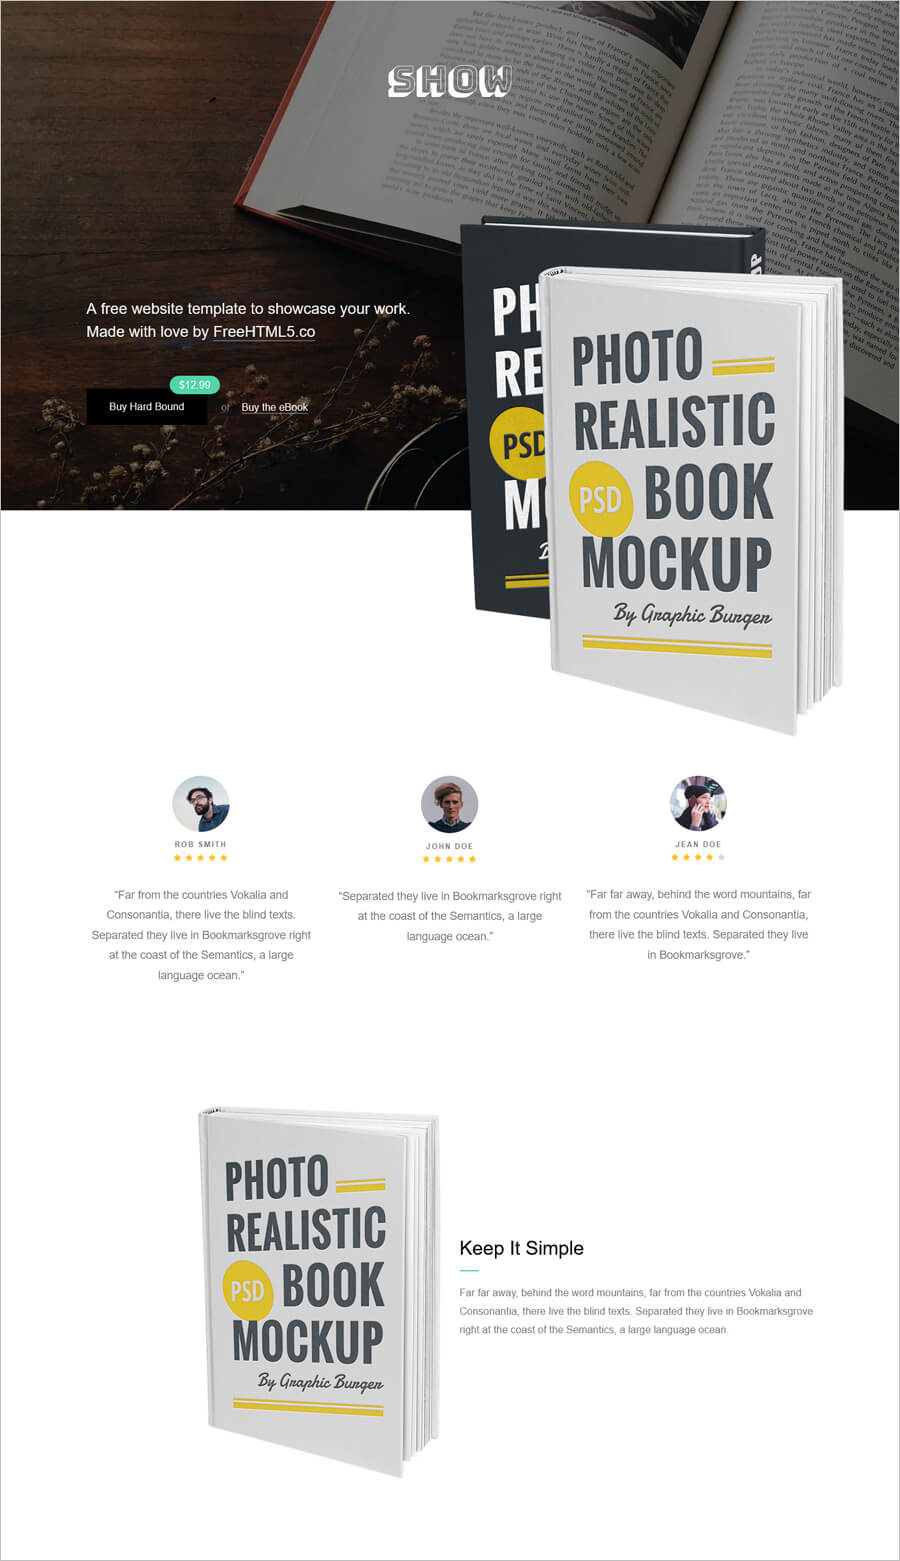 Free HTML5 Bootstrap Template for Books Store 